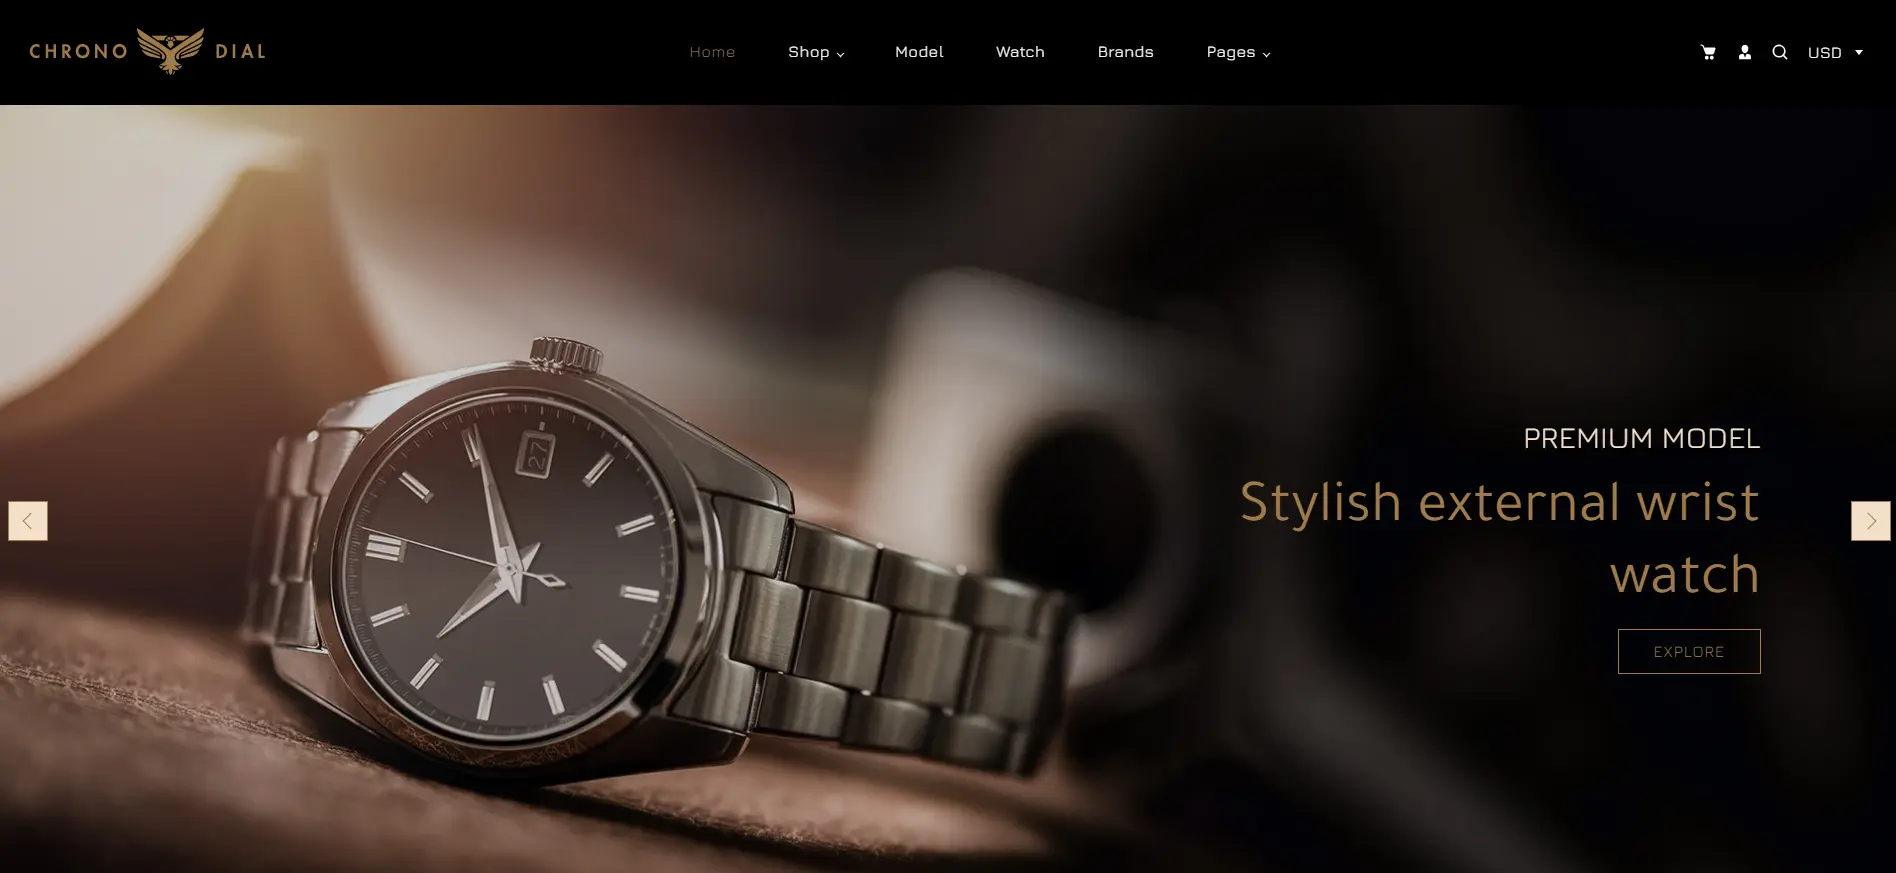 single-product-shopify-themes-6